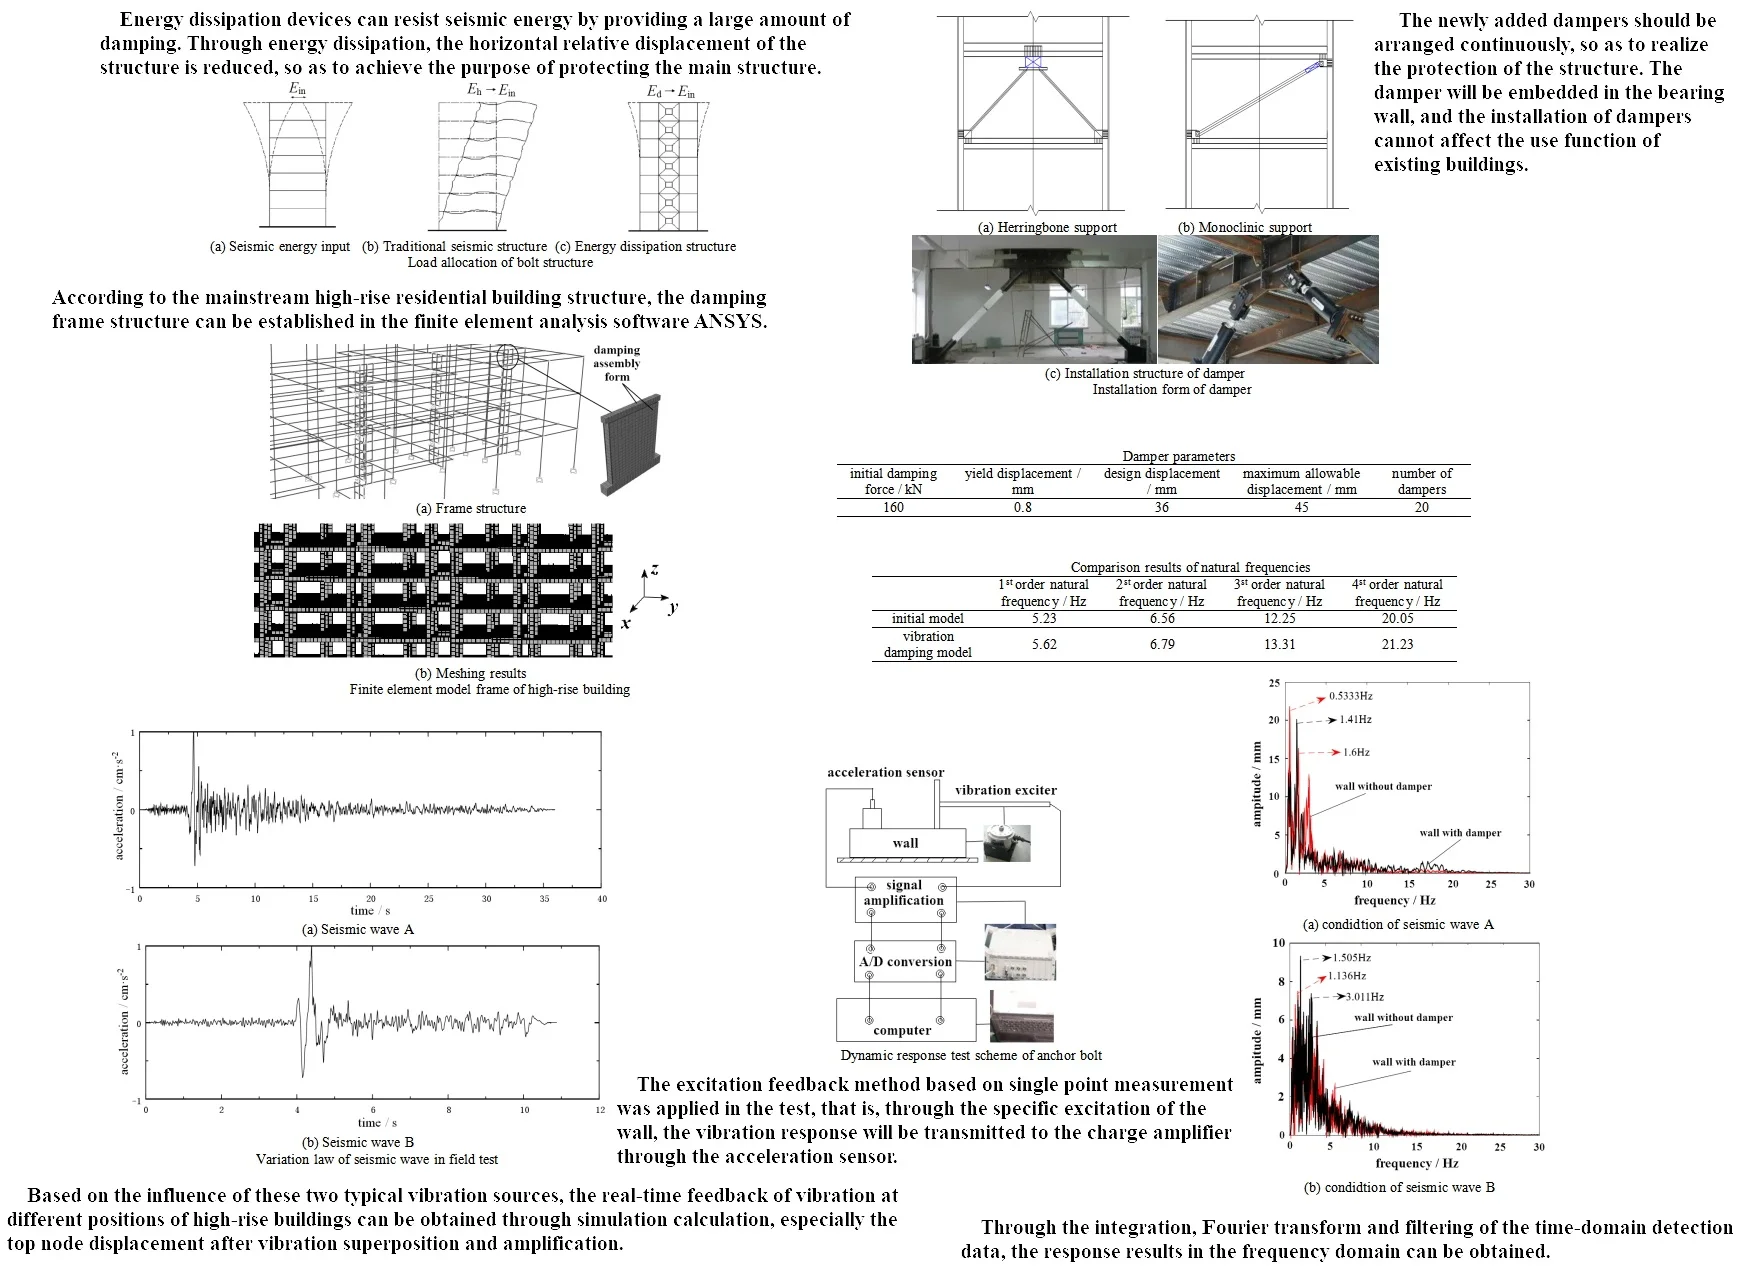 Analysis and optimization of seismic performance of high-rise residential building